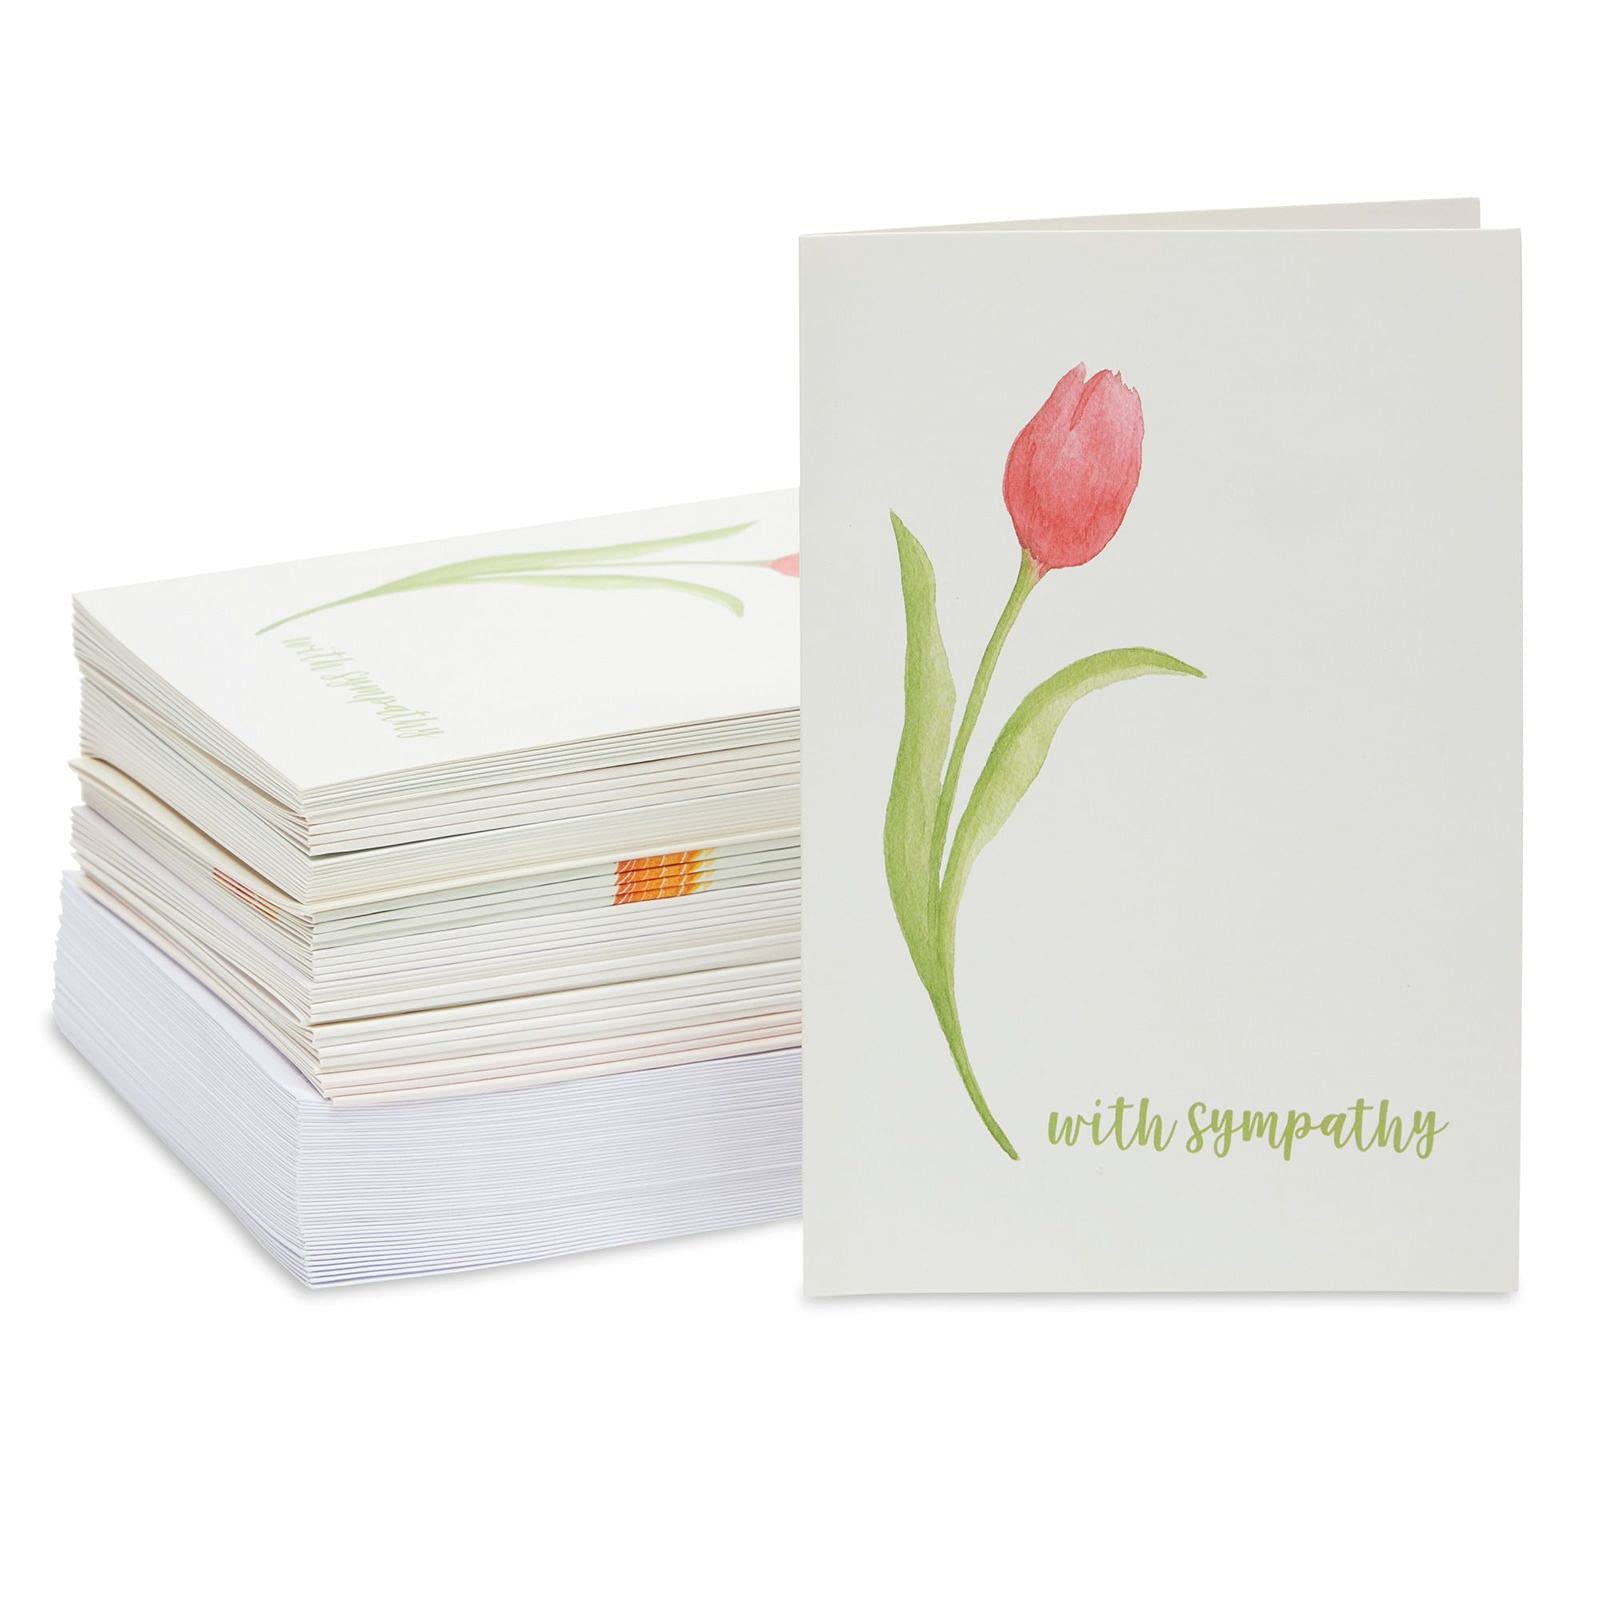 Best Paper Greetings 48-Pack of Bulk Sympathy and Get Well Cards Assortment Box with Envelopes with 12 Floral Designs, Blank On The Inside for Family, Friends, Coworkers (4x6 Inches)